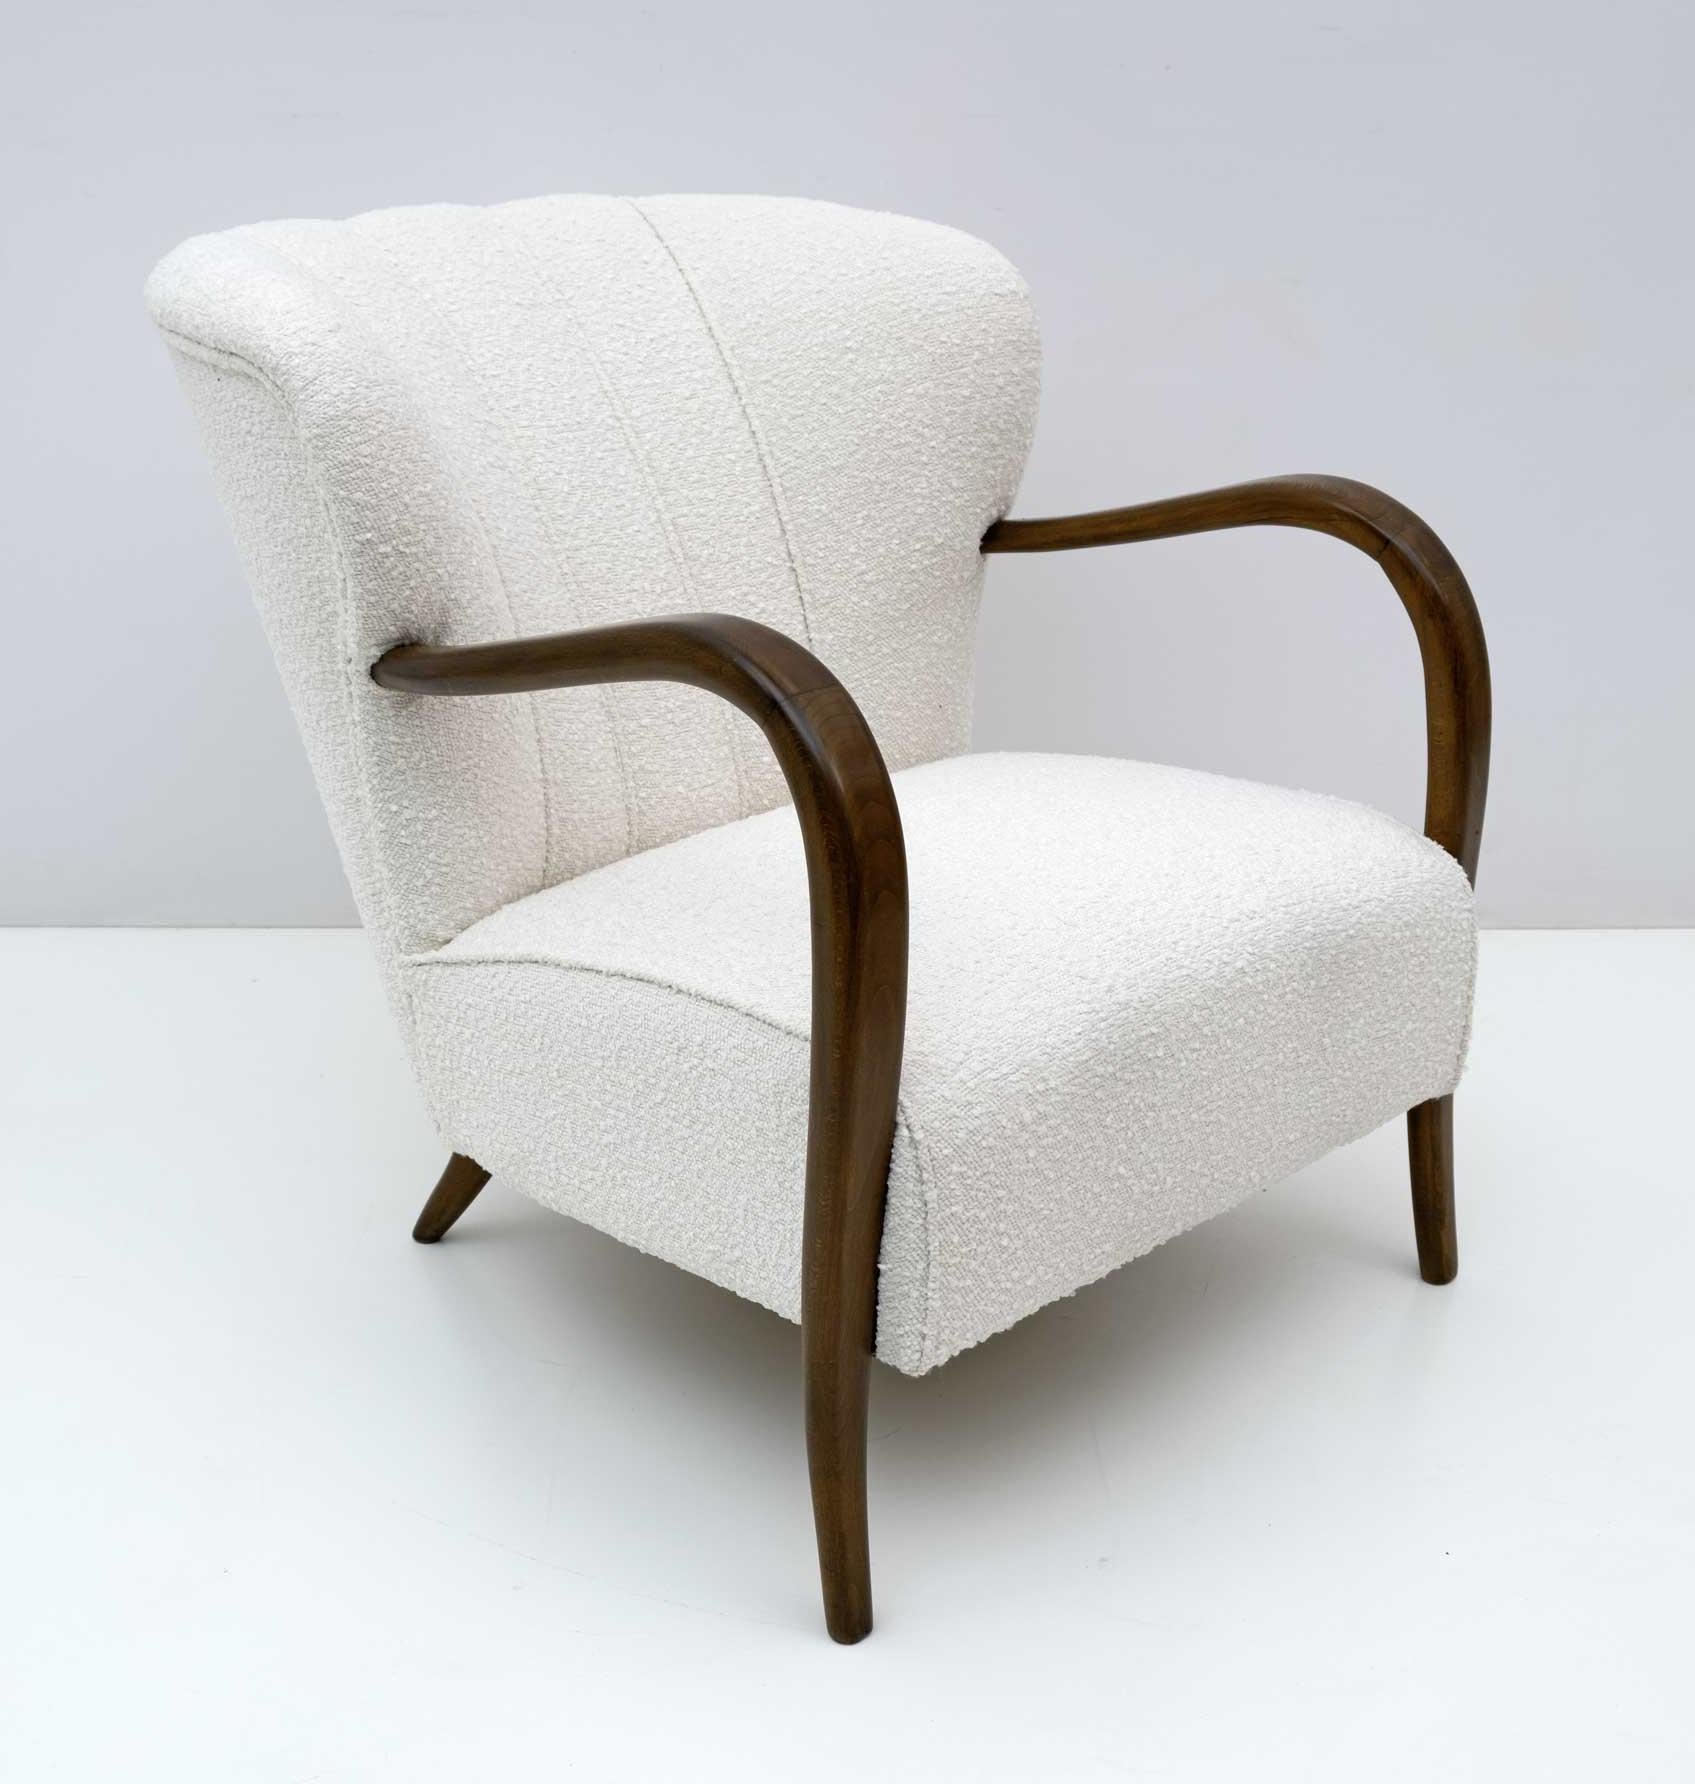 Comfortable armchair designed by Malatesta and Masson, Art Deco style, with rounded curves of great design, completely restored and upholstered in light ivory bouclé fabric. This lounge chair would fit perfectly in a living room as well as in the